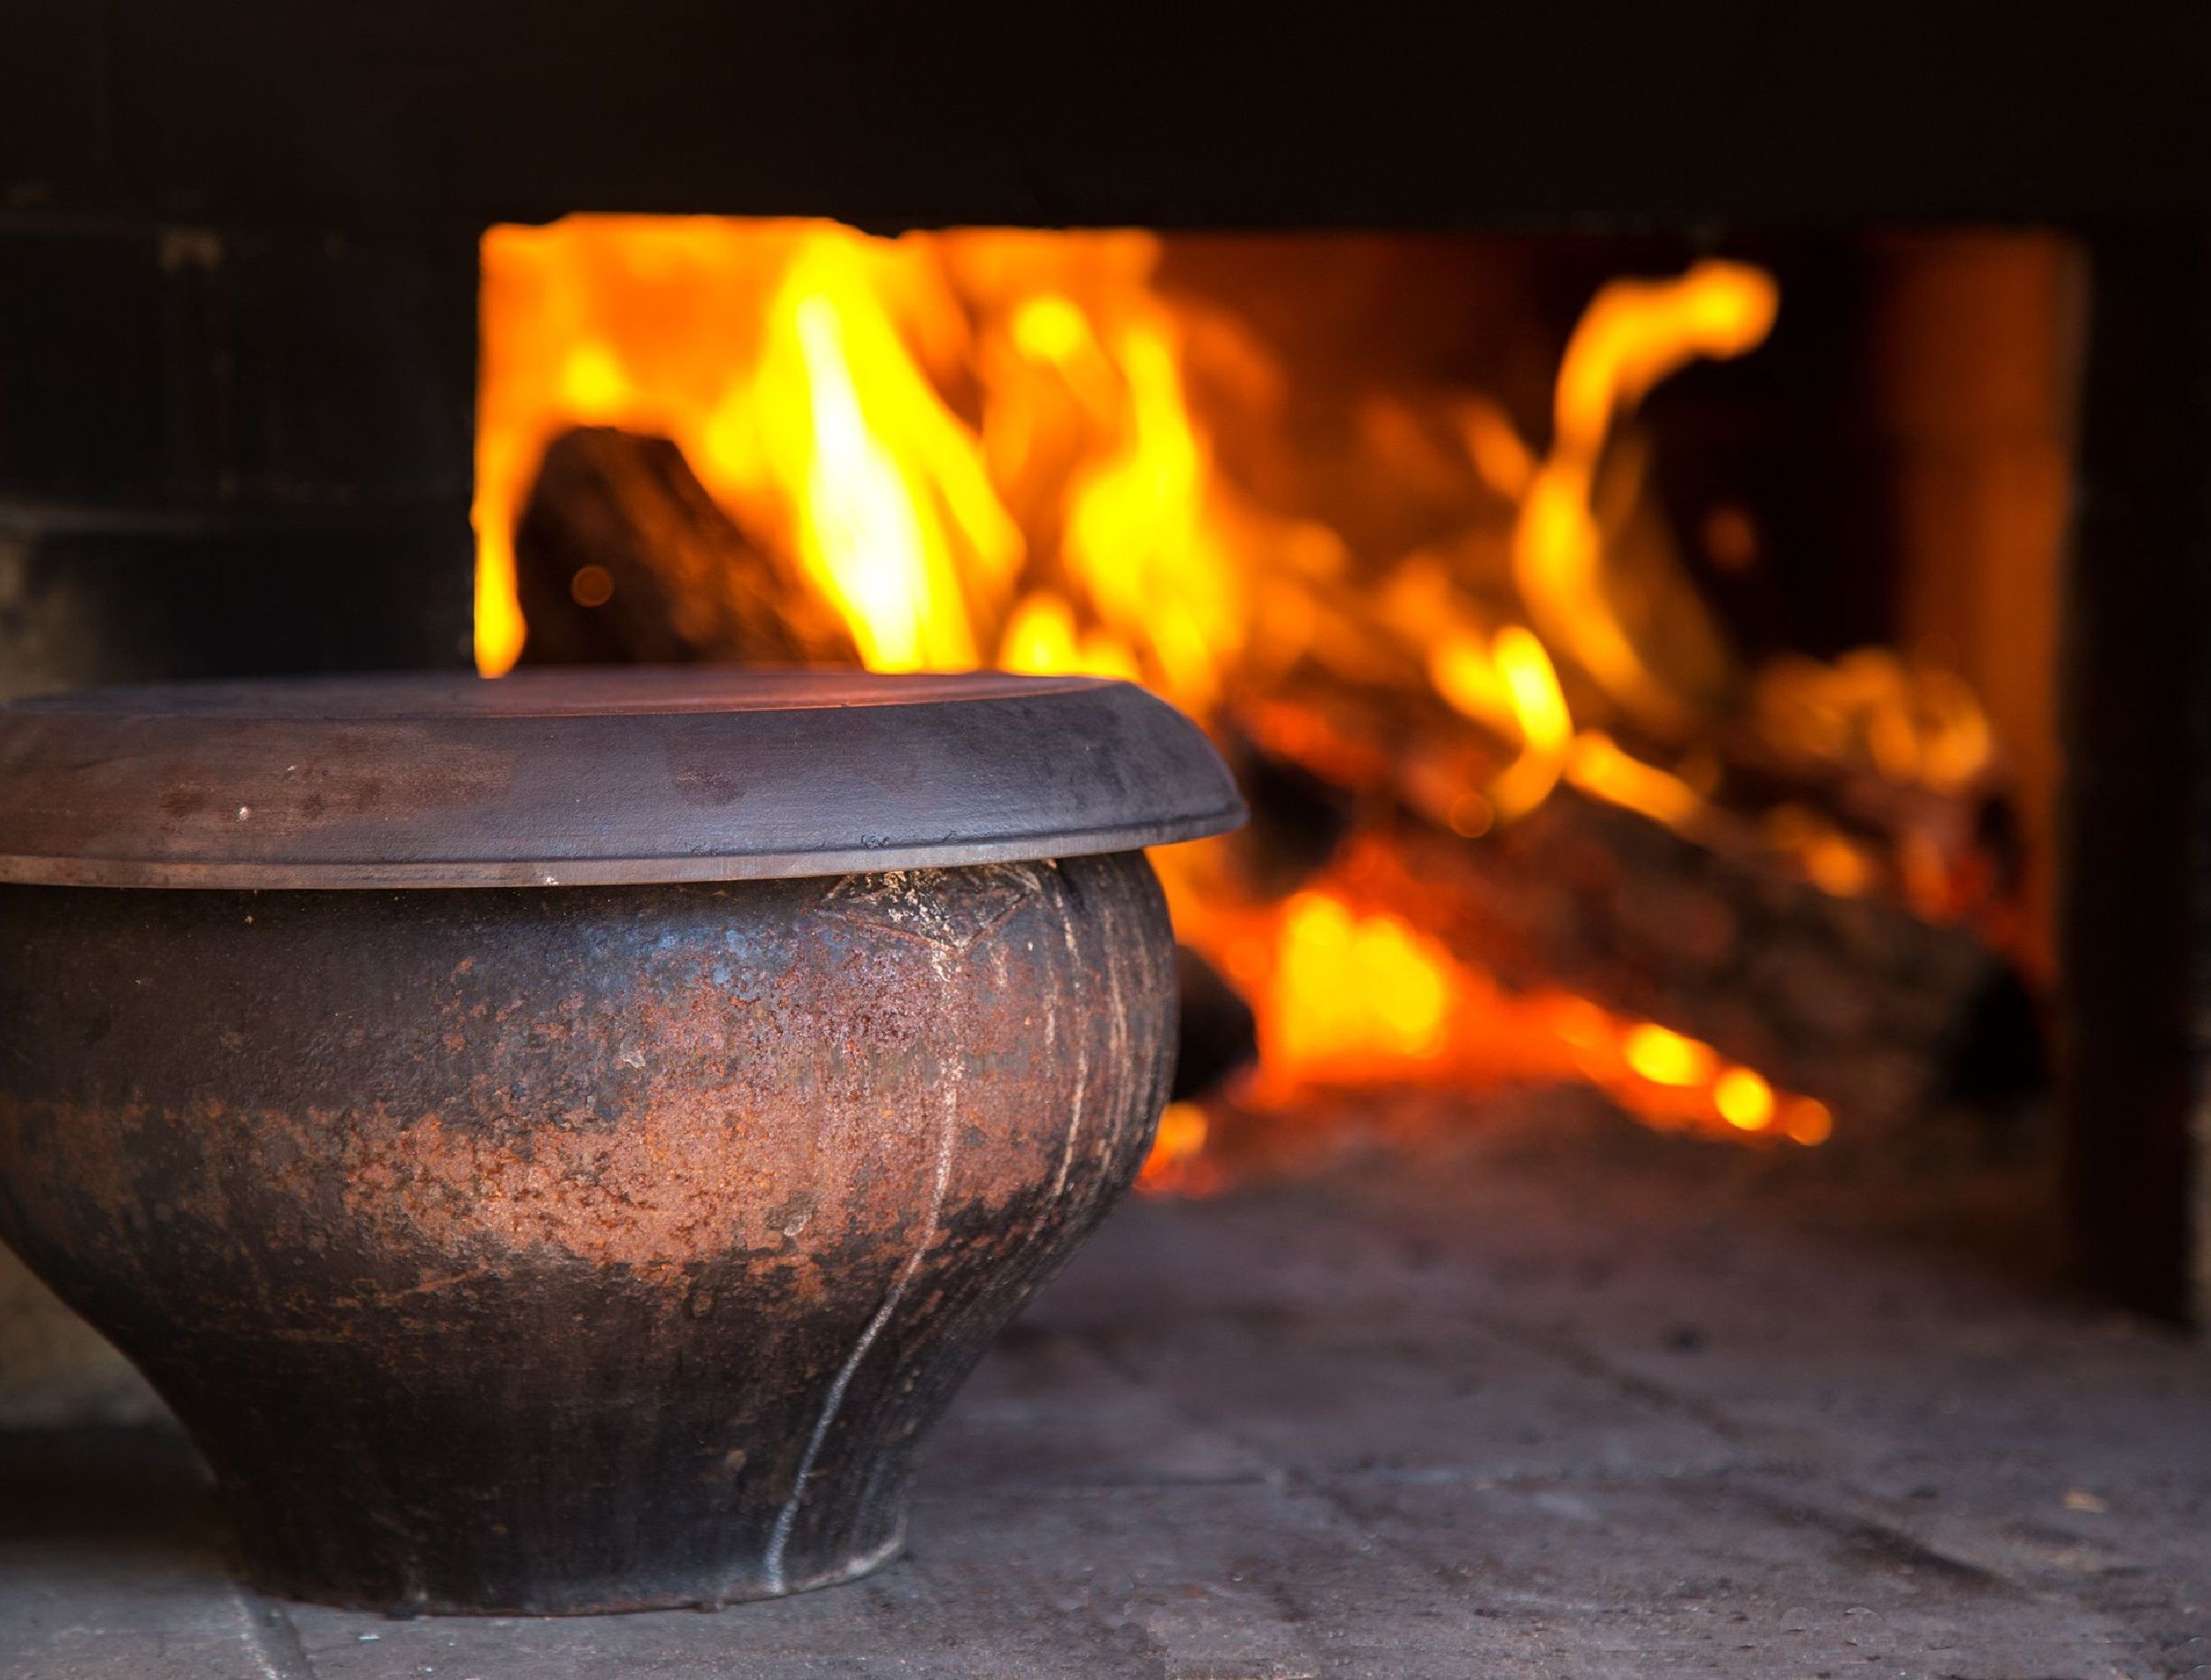 The fire in the old traditional russian village oven in a rustic style. Pot of soup near the burning wood